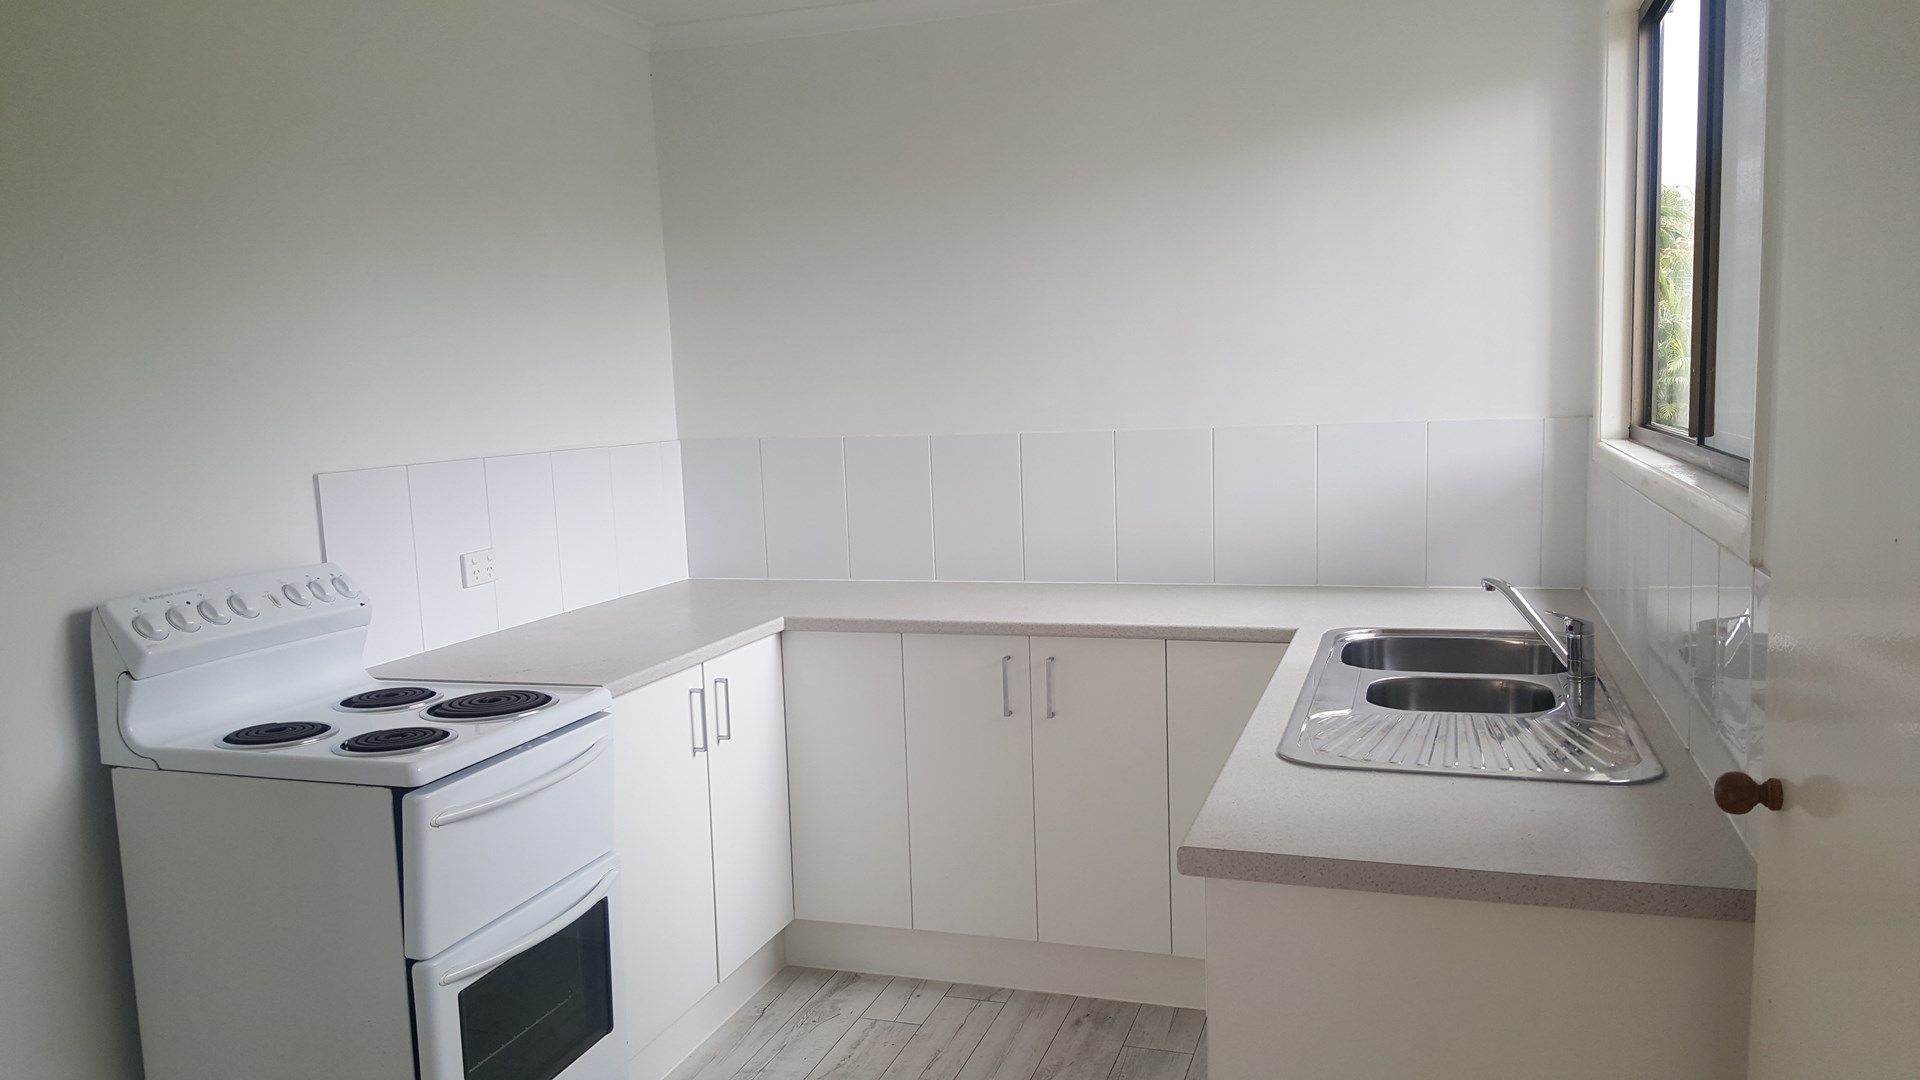 2 bedrooms Apartment / Unit / Flat in 2/10 Impey Ave TIN CAN BAY QLD, 4580